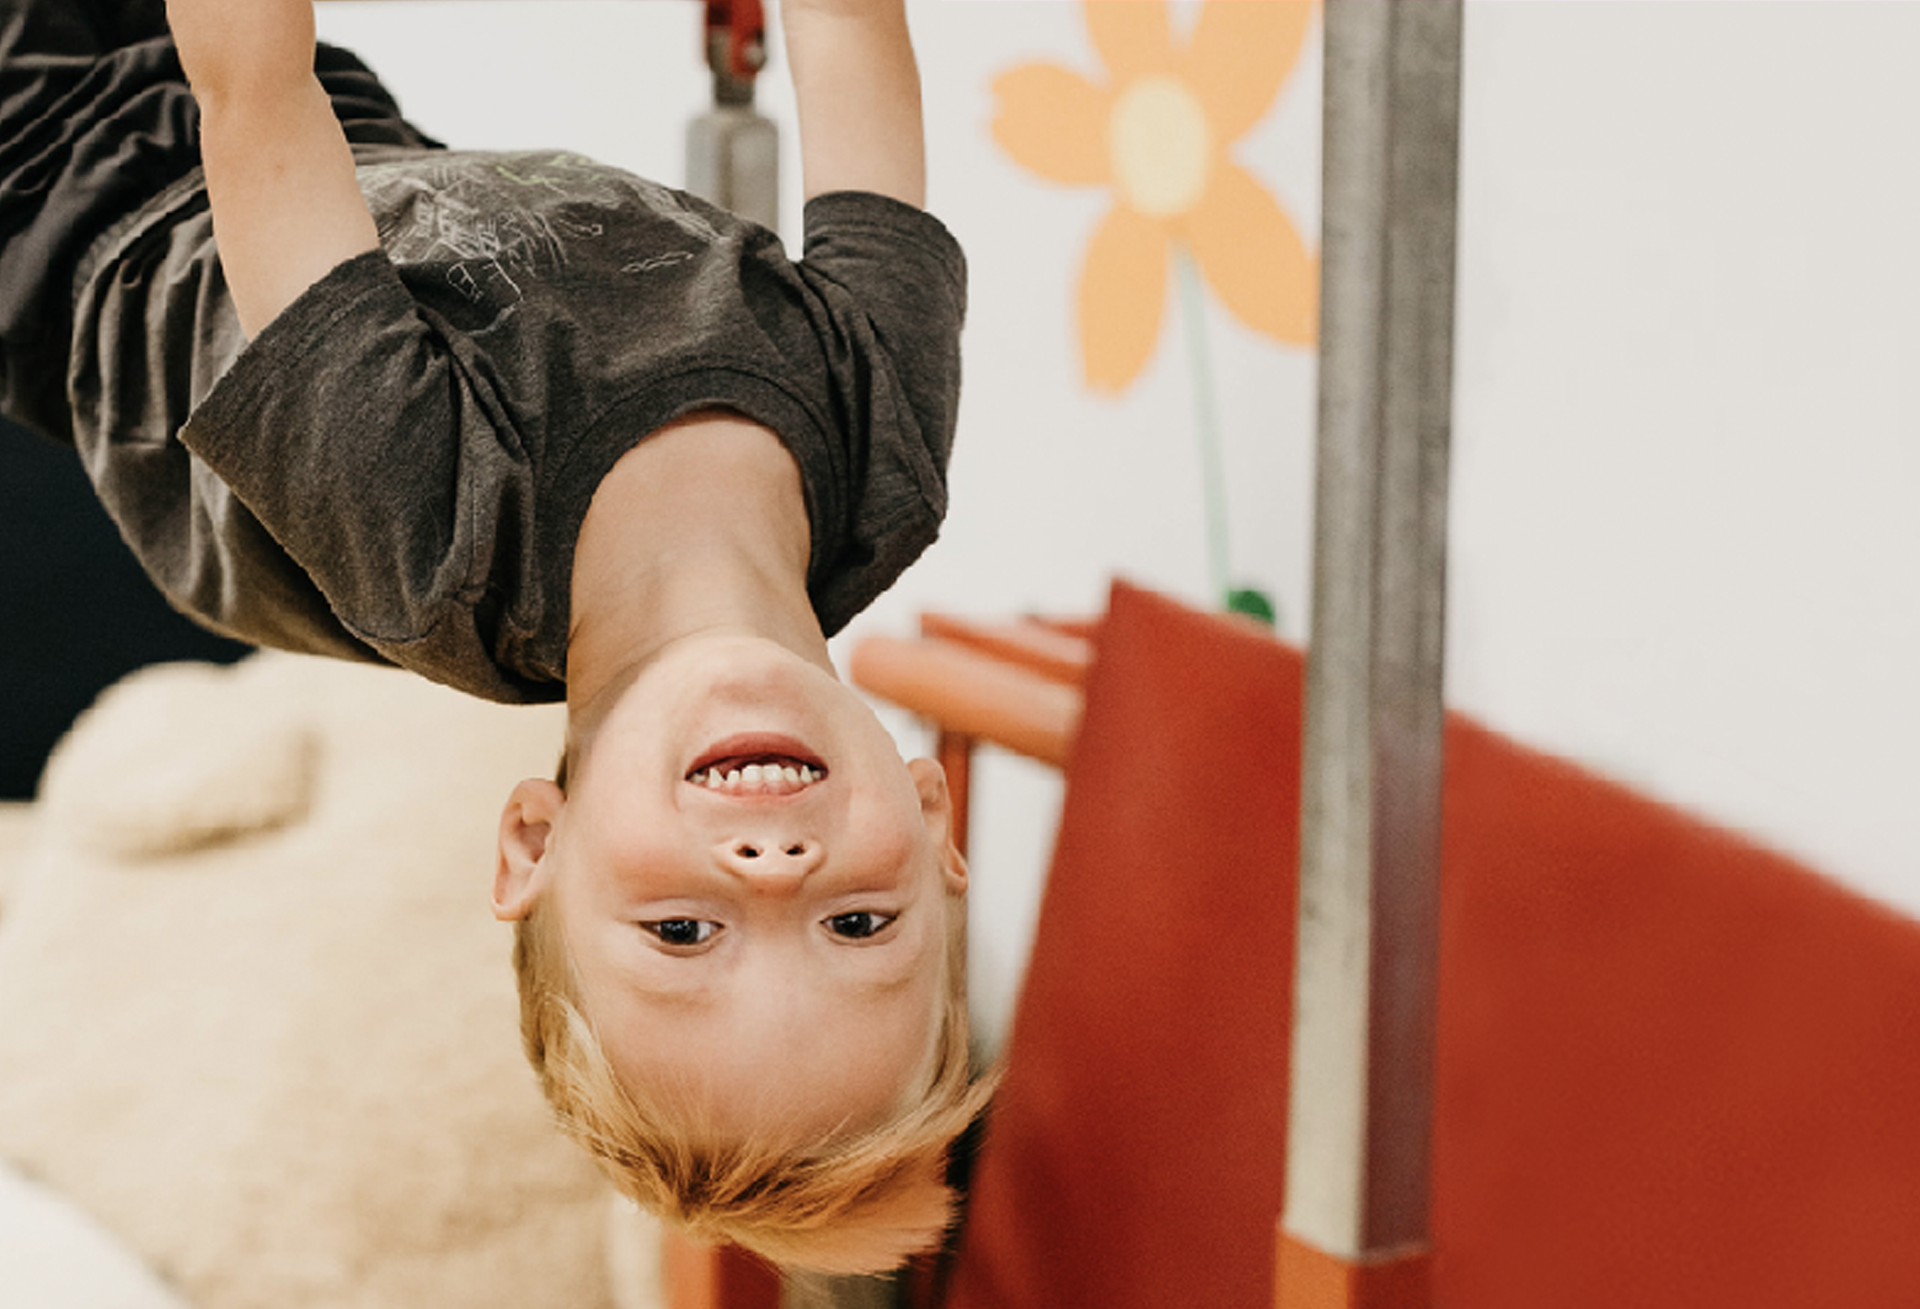 A young boy is hanging upside down from a pole.